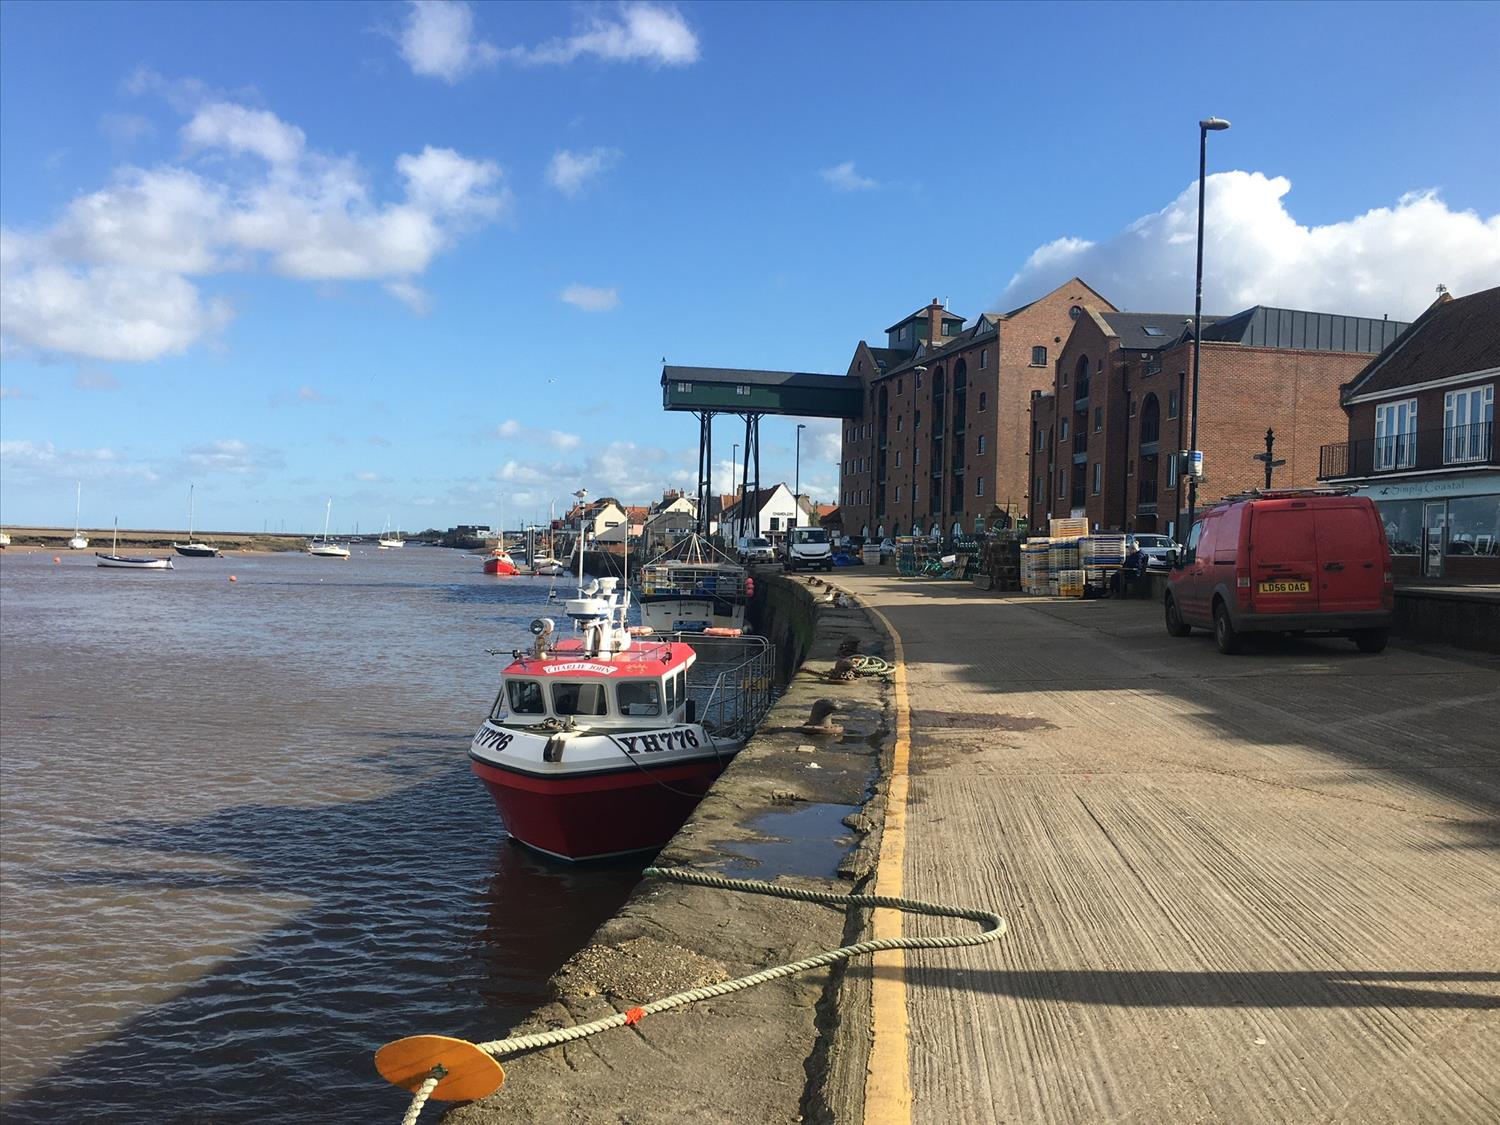 Quayside at Wells-Next-The-Sea @NorfolkCoastline